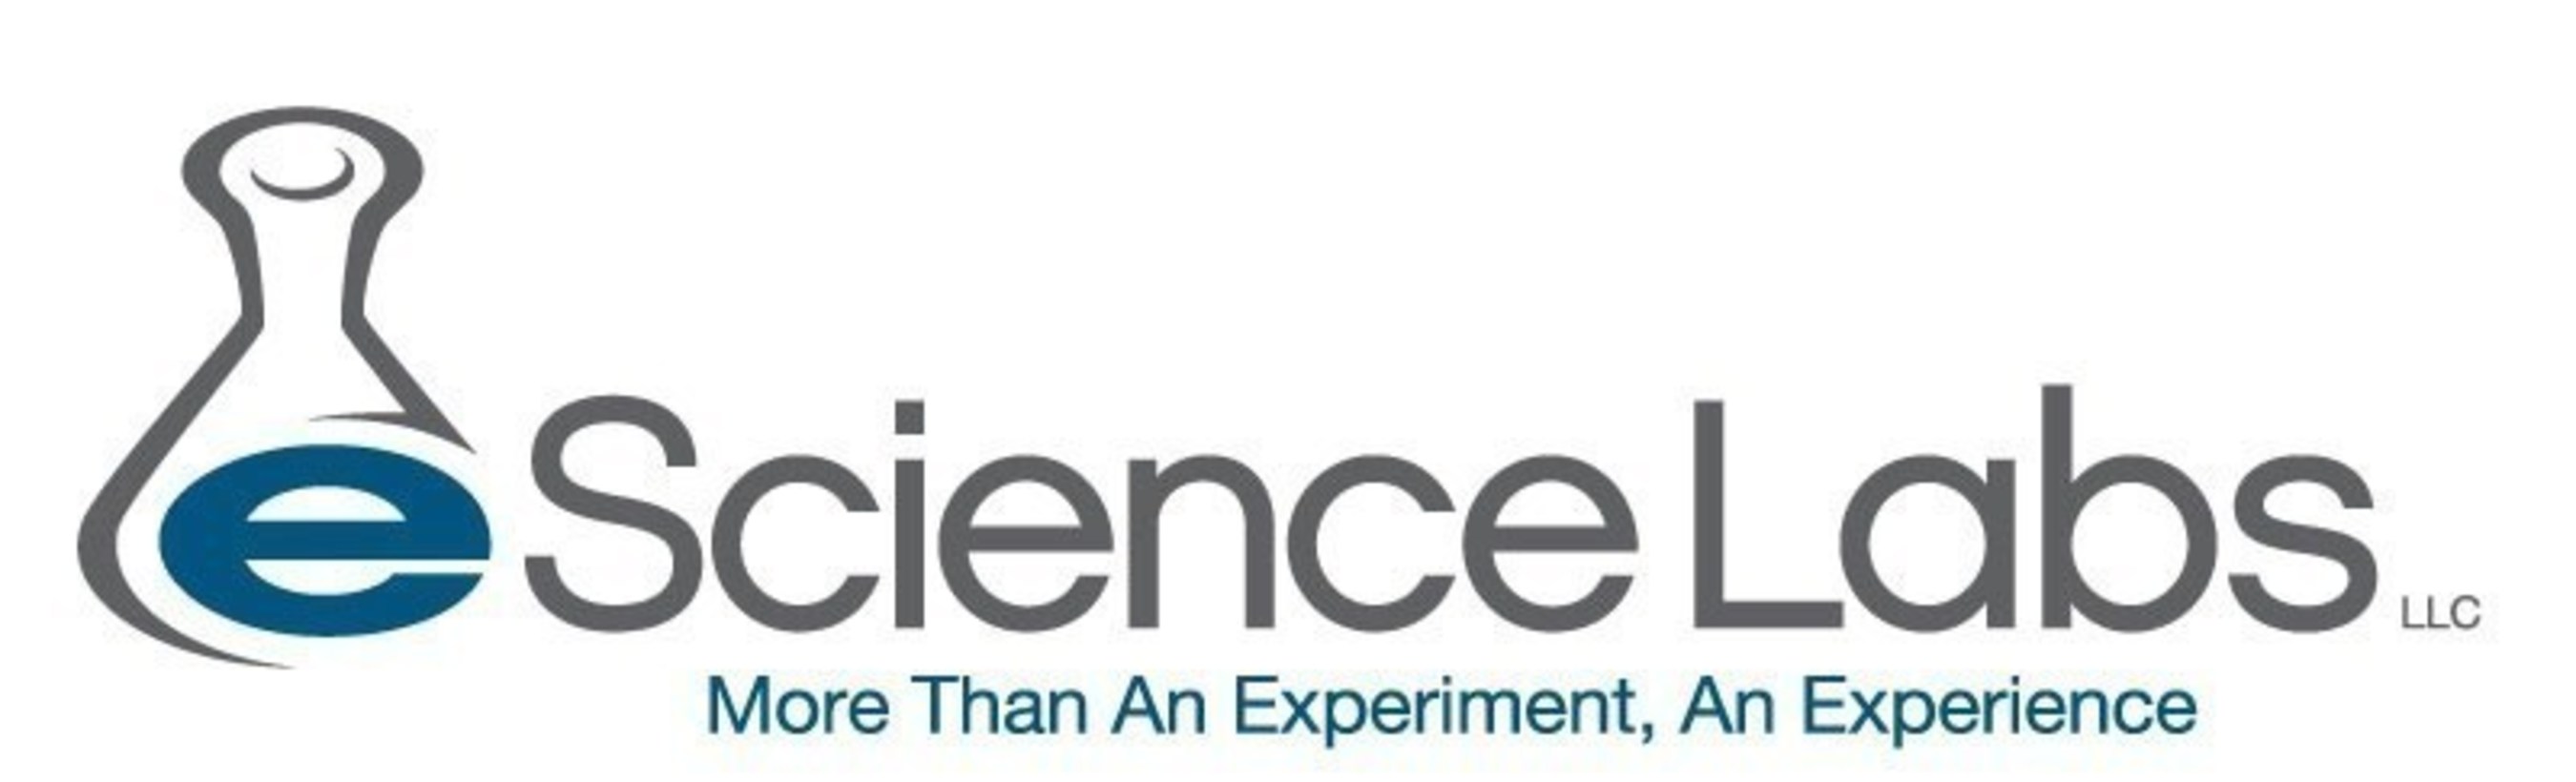 eScience Labs, LLC provides complete and comprehensive hands-on science kits and digital curriculum to support online and traditional courses in need of a laboratory solution.